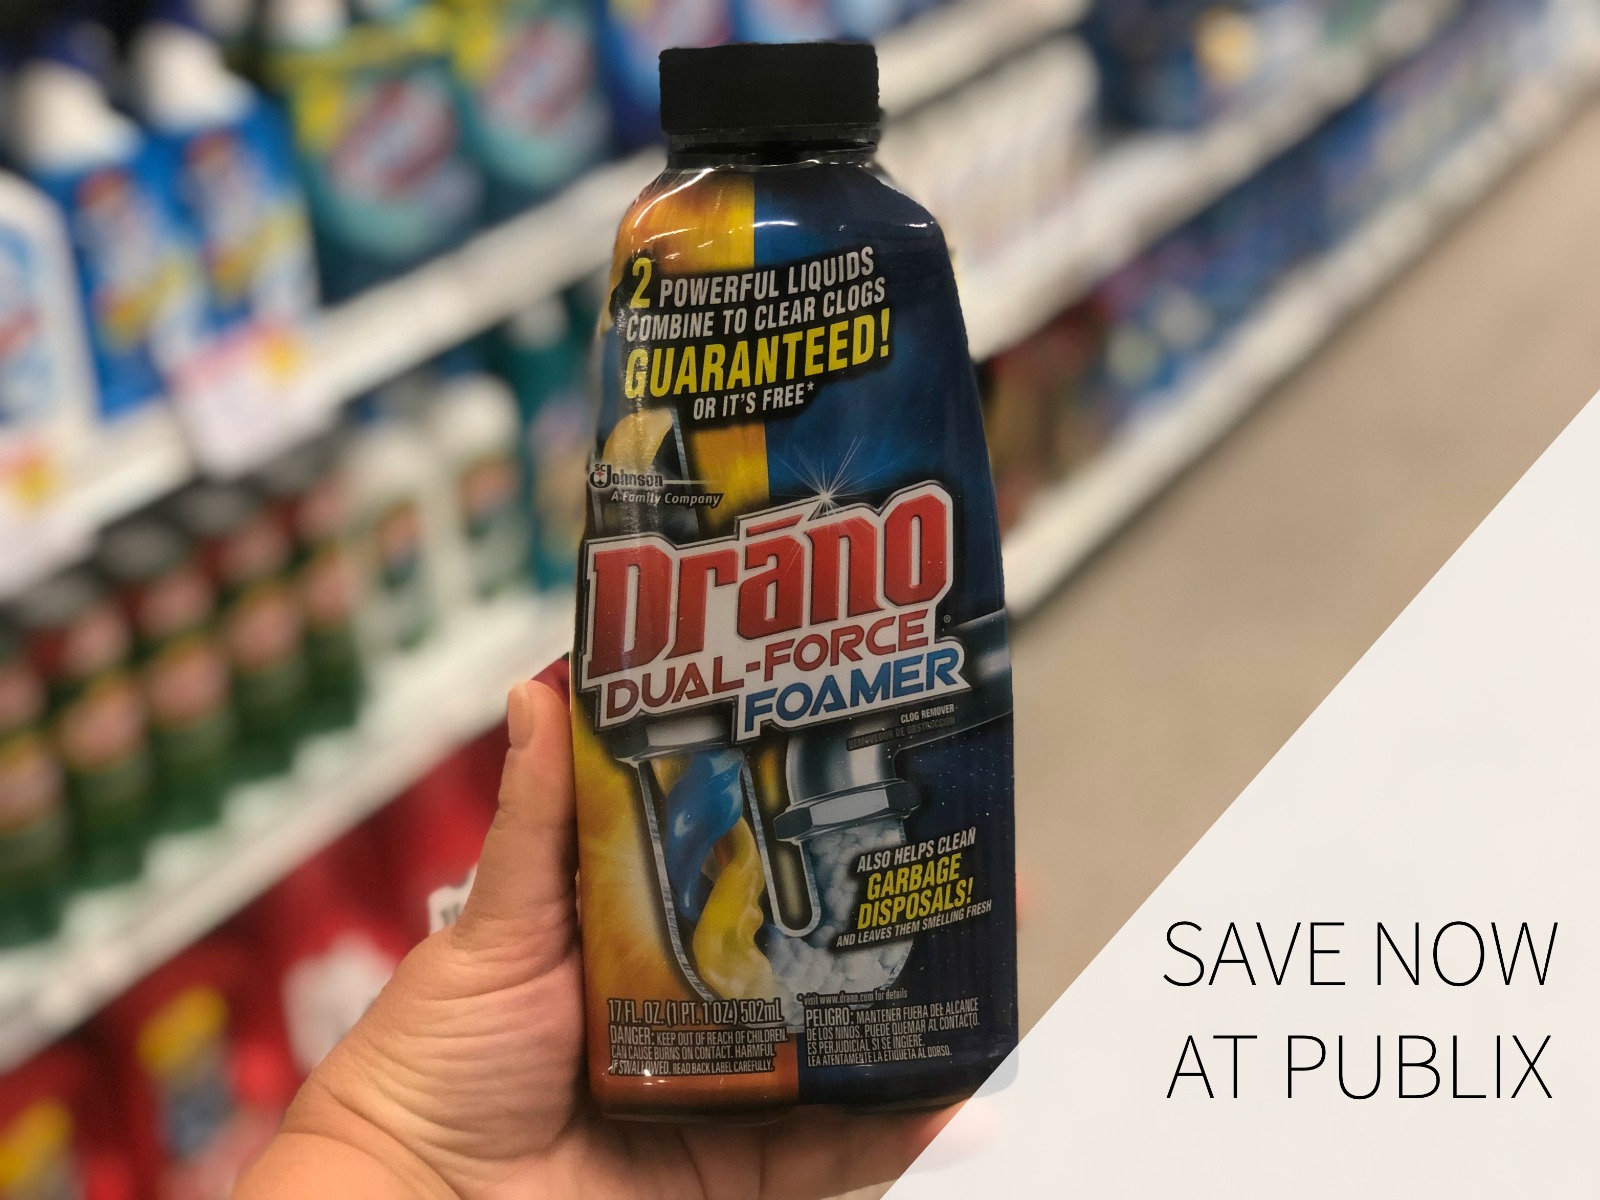 Pick Up A Super Deal On Drano® Products & Be Ready For Any Holiday Mess! on I Heart Publix